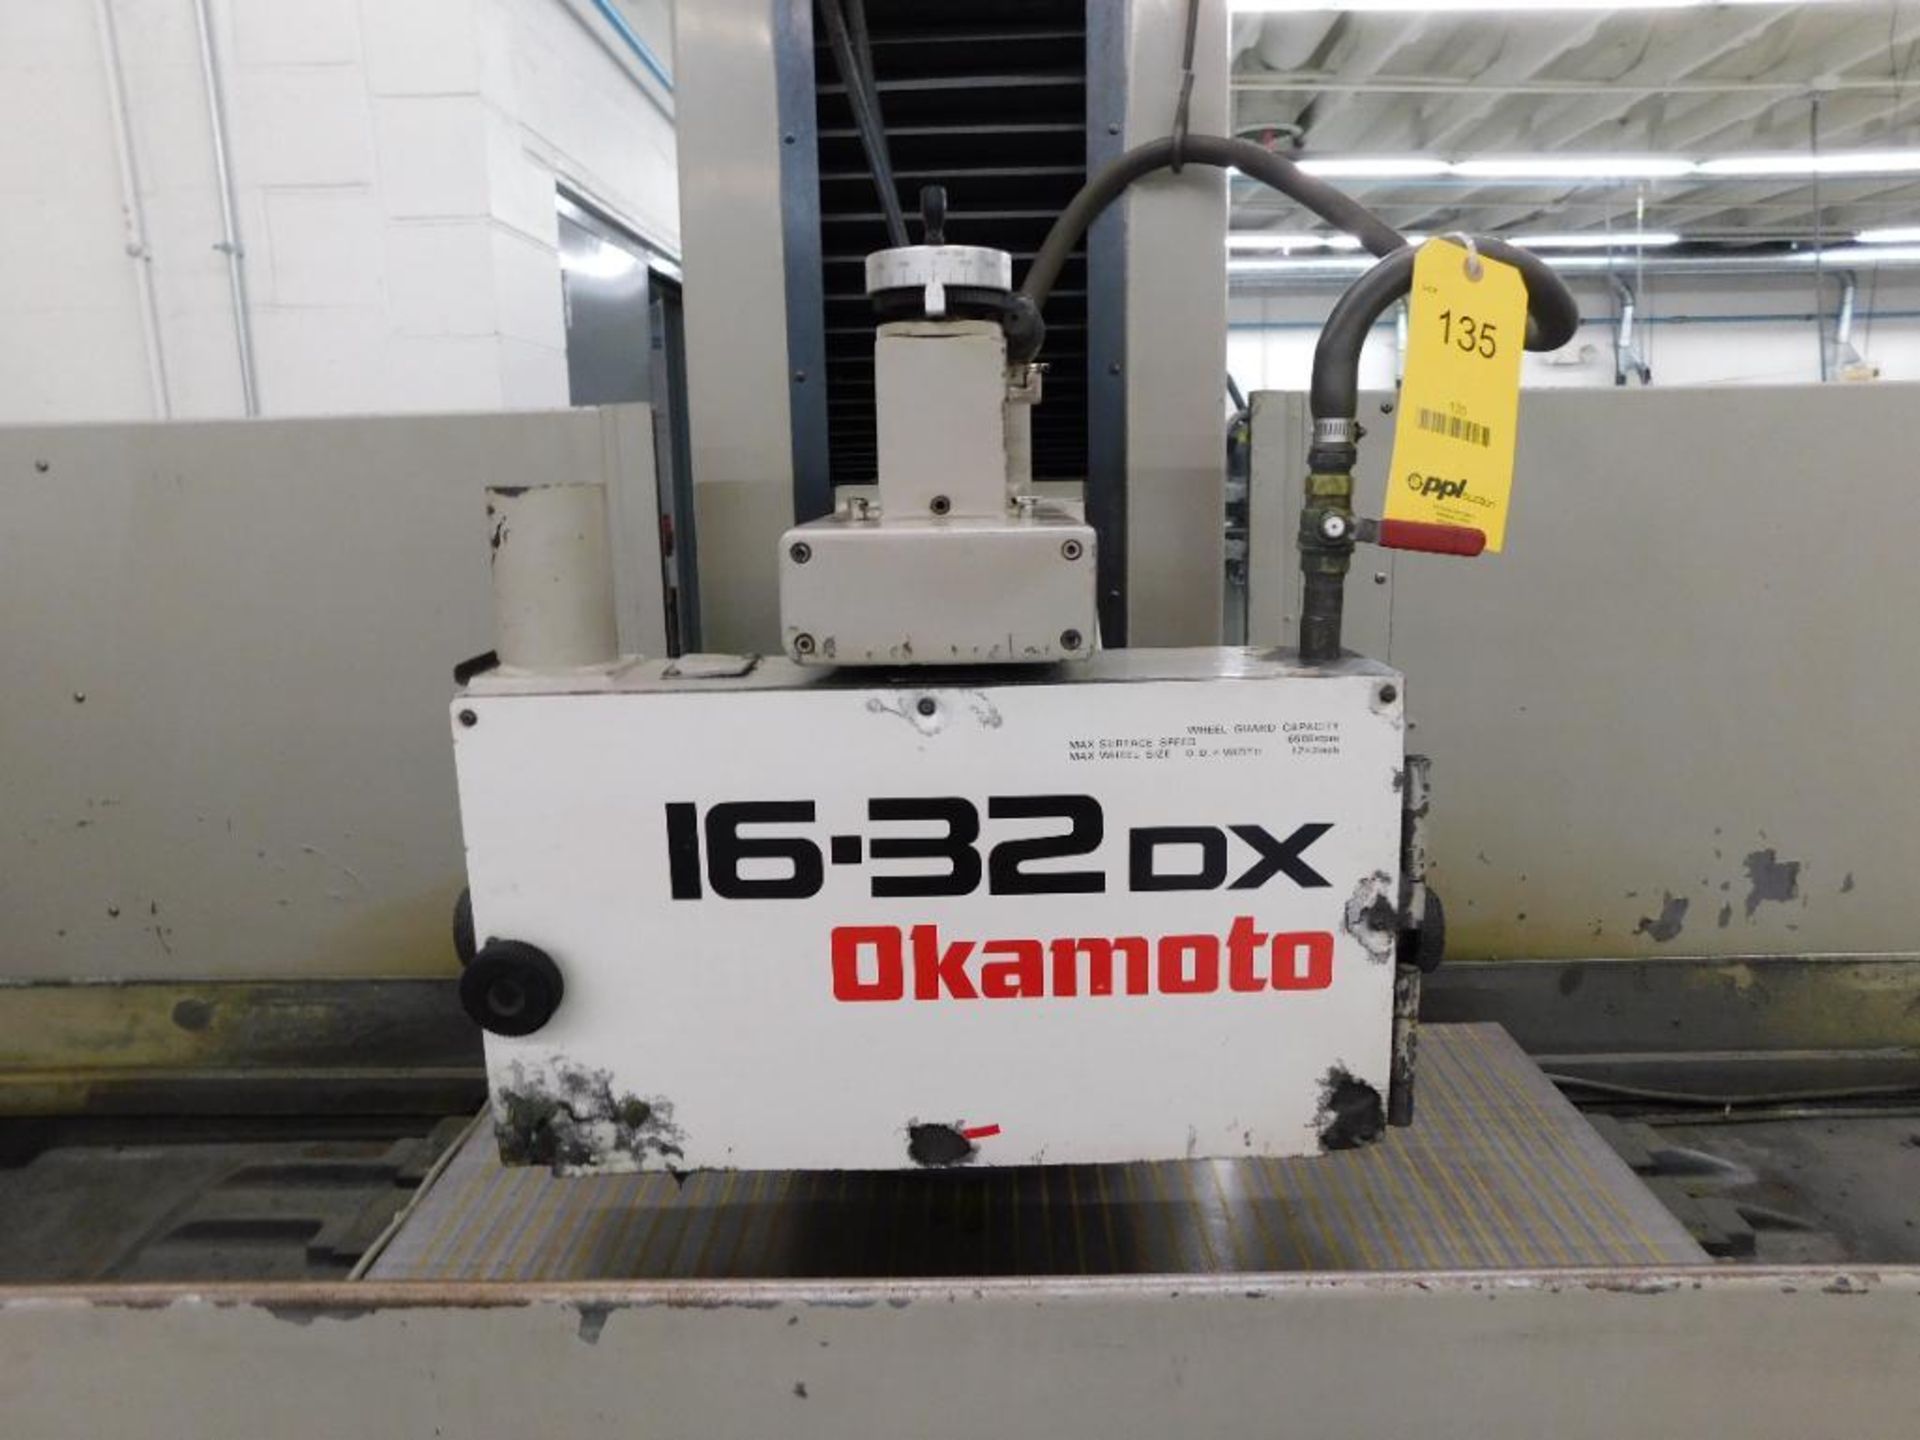 Okamoto 16 in. x 32 in. Hydraulic Surface Grinder Model AC-1632DX, S/N 68476, with Magnetic Chuck, C - Image 5 of 7